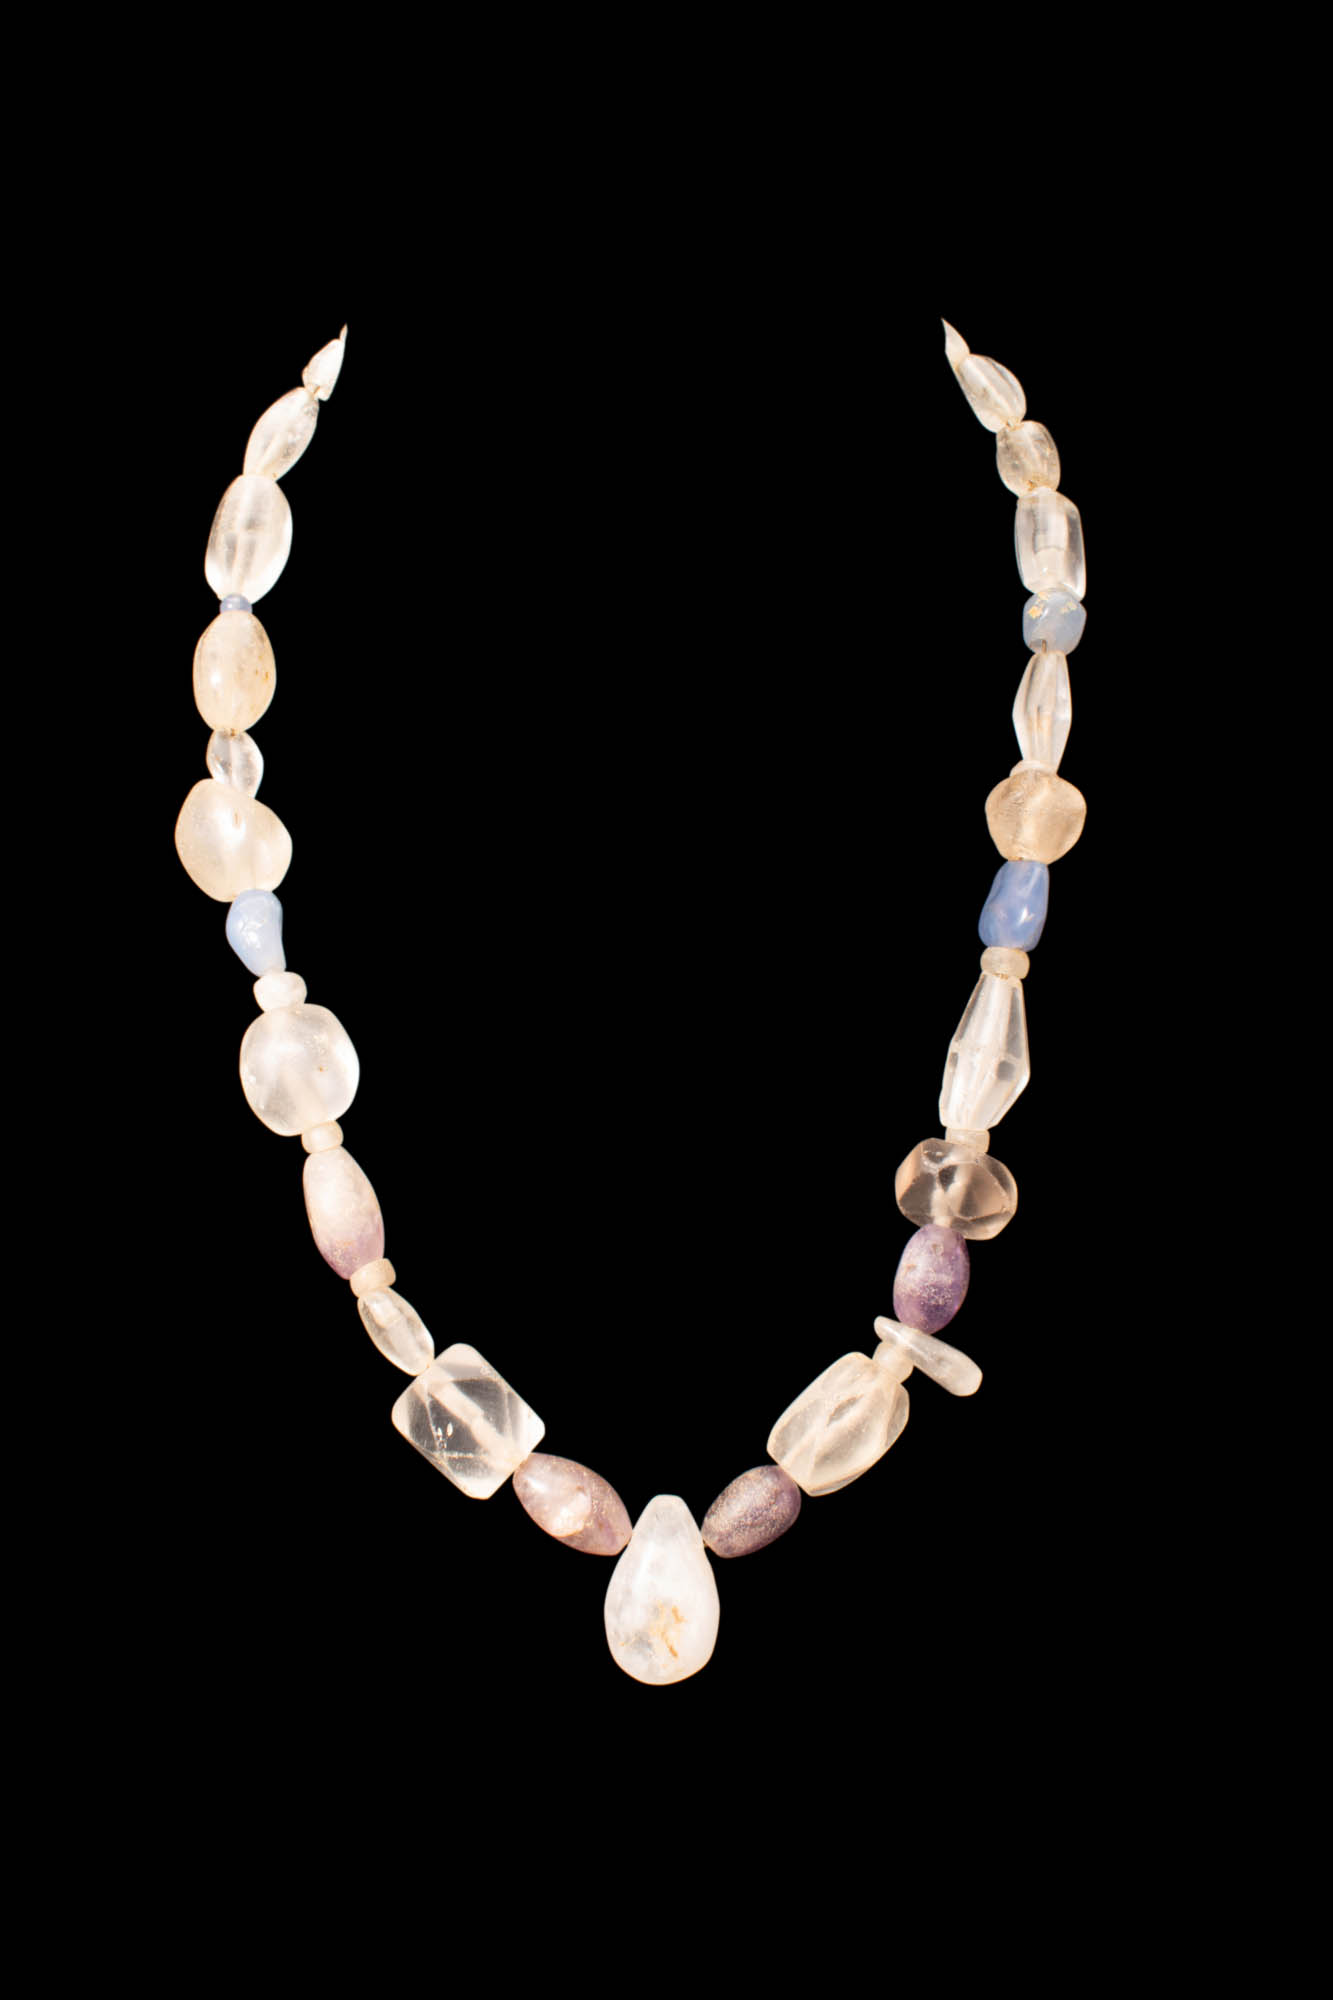 EGYPTIAN SEMI PRECIOUS STONE NECKLACE WITH PENDANT - Image 2 of 5